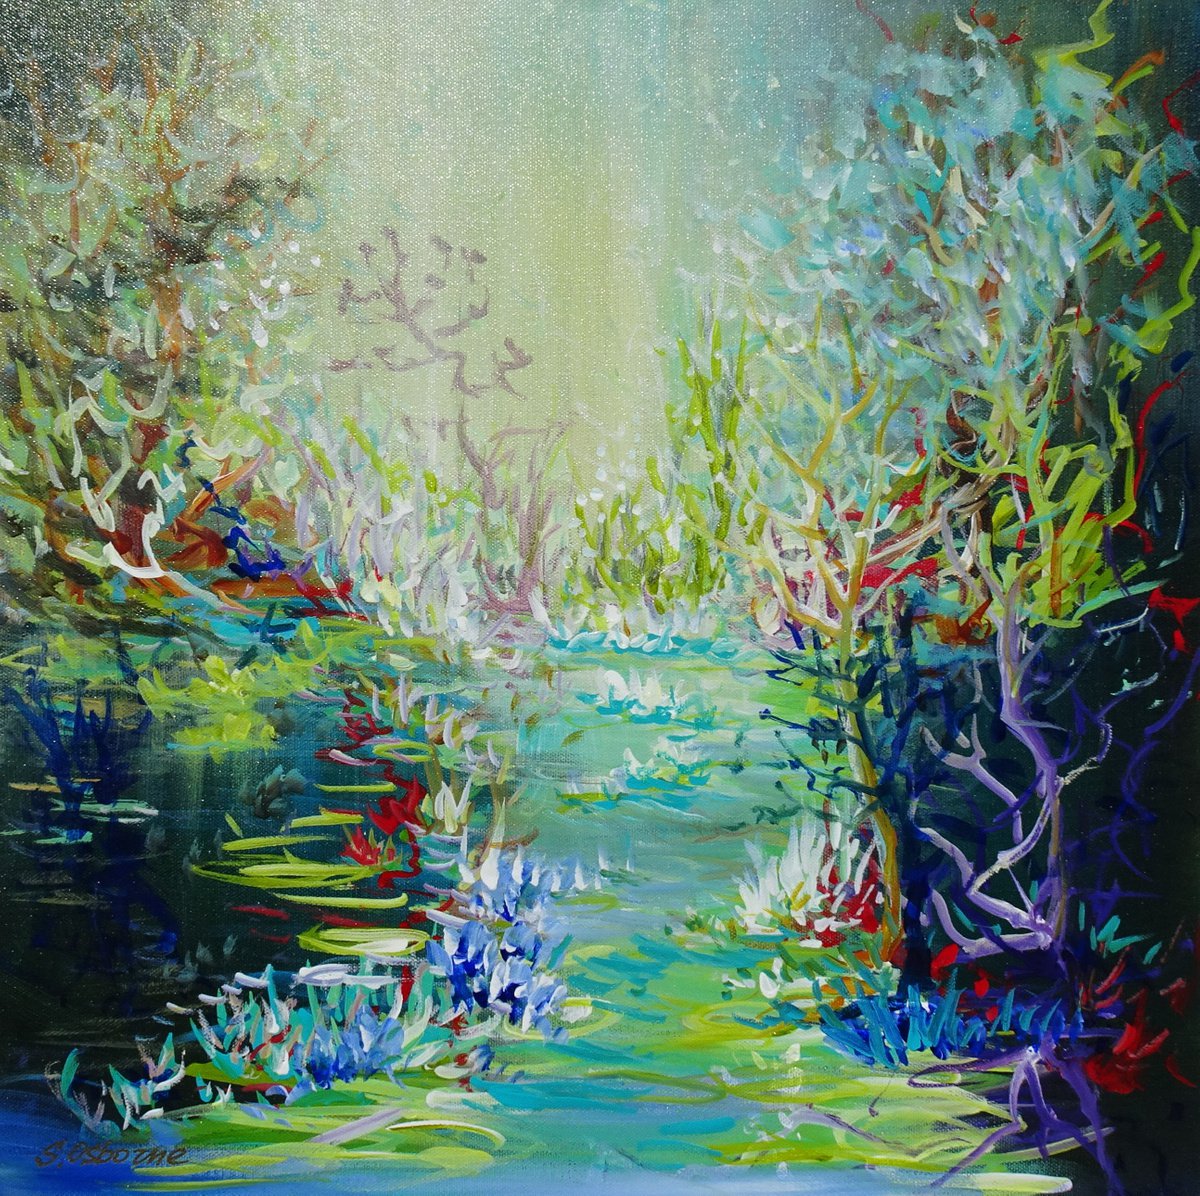 WATER LILY POND. Modern Impressionism inspired by Claude Monet Water-lilies by Sveta Osborne